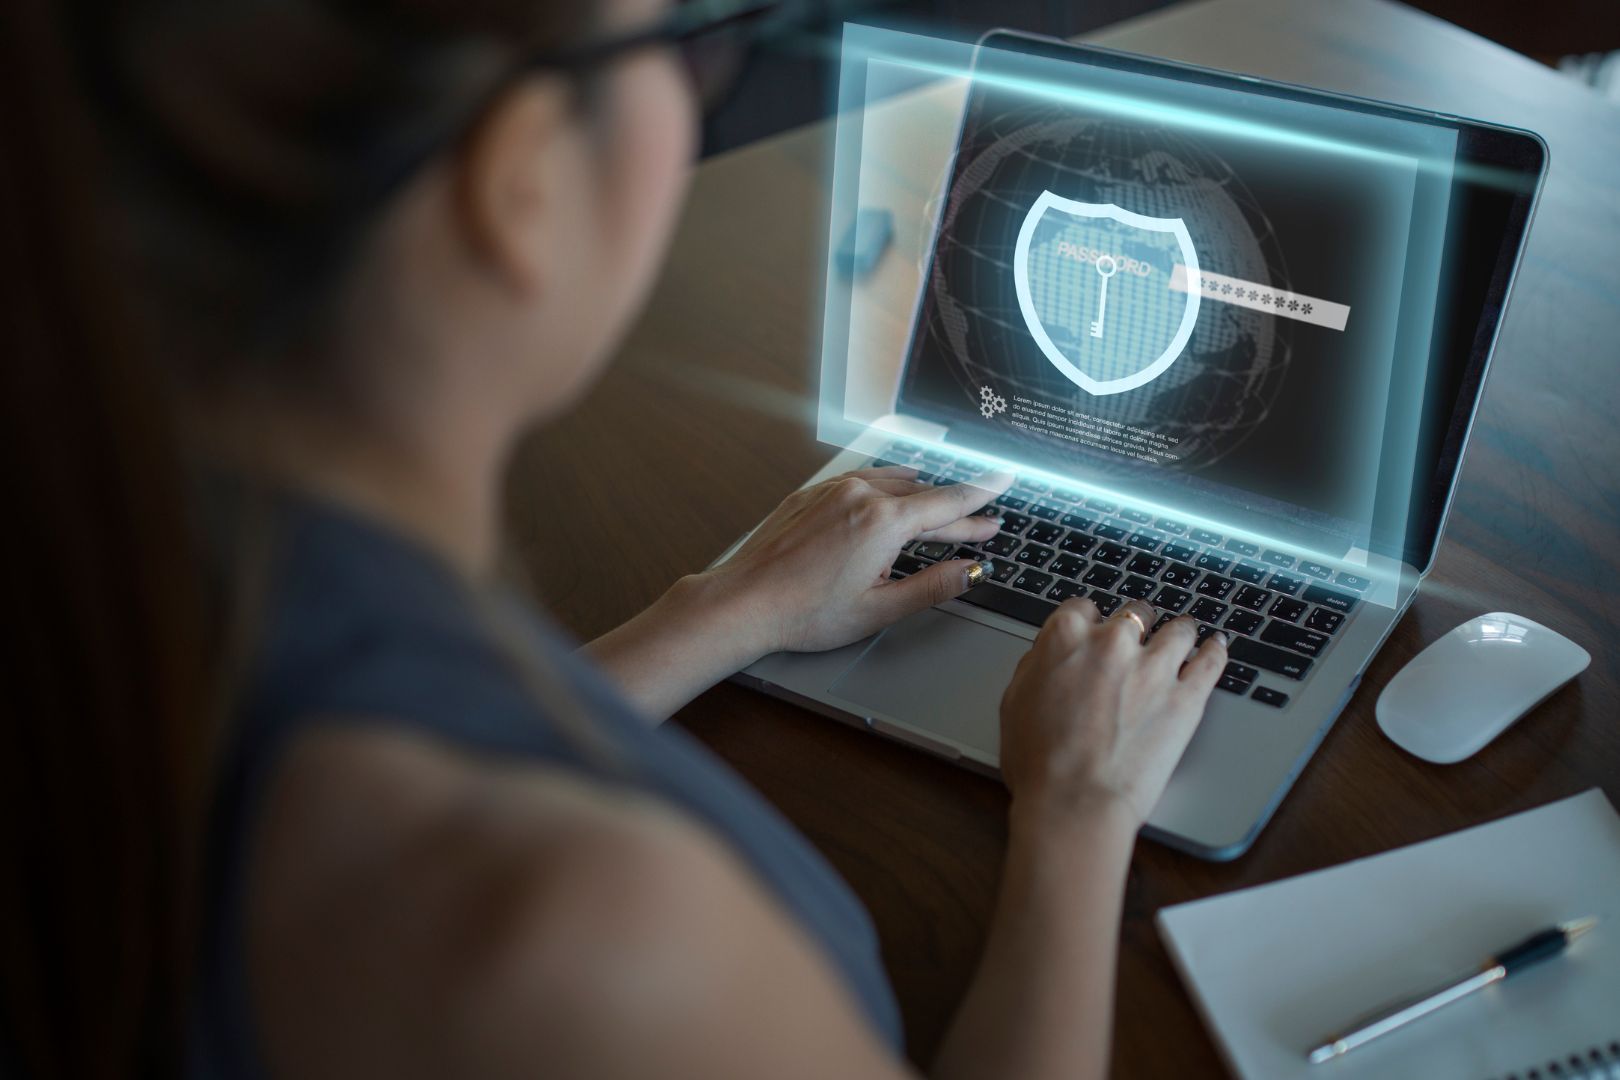 Managing B2B ecommerce security breaches at peak times